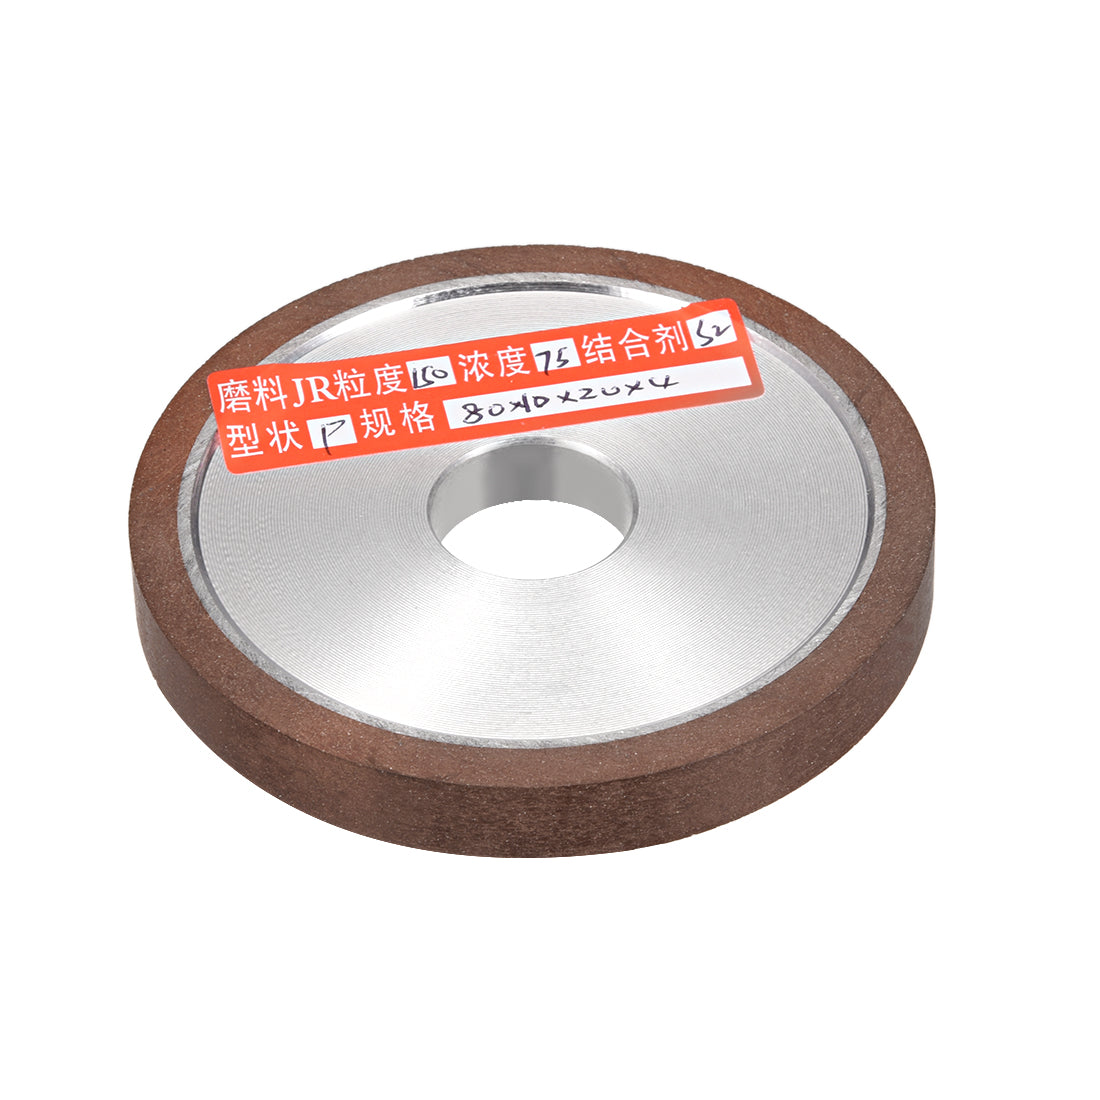 Uxcell Uxcell 3.15-Inch Diamond Grinding Wheels Resin Bonded Flat Abrasive Wheel for Carbide Metal 150 Grits 75%